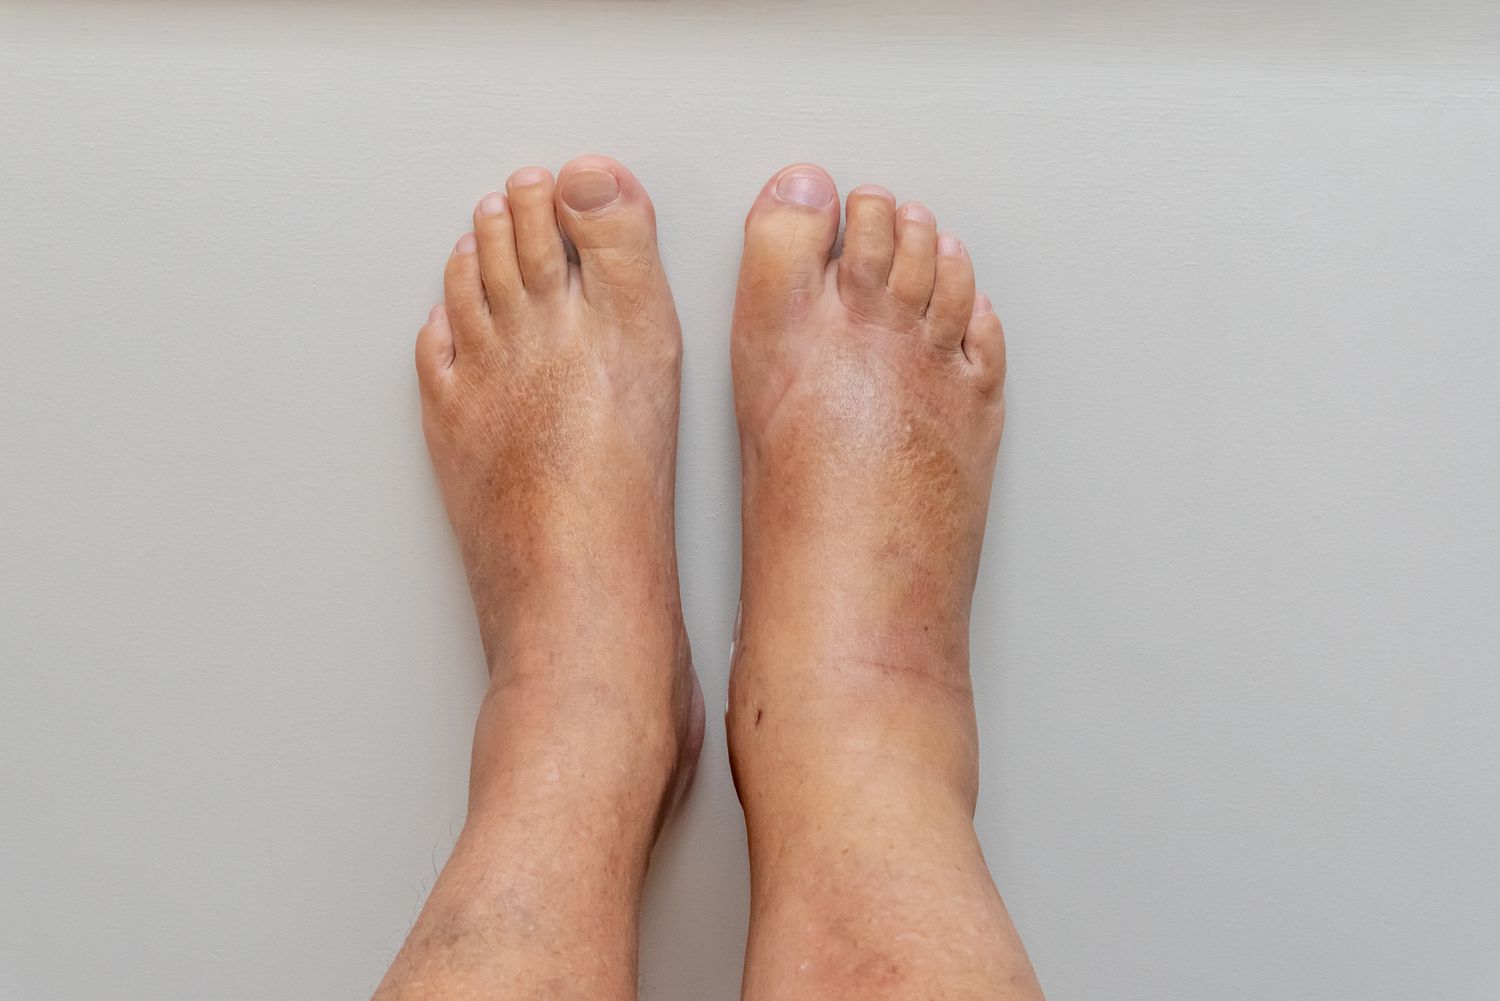 Swelling in feet could be signs of kidney trouble